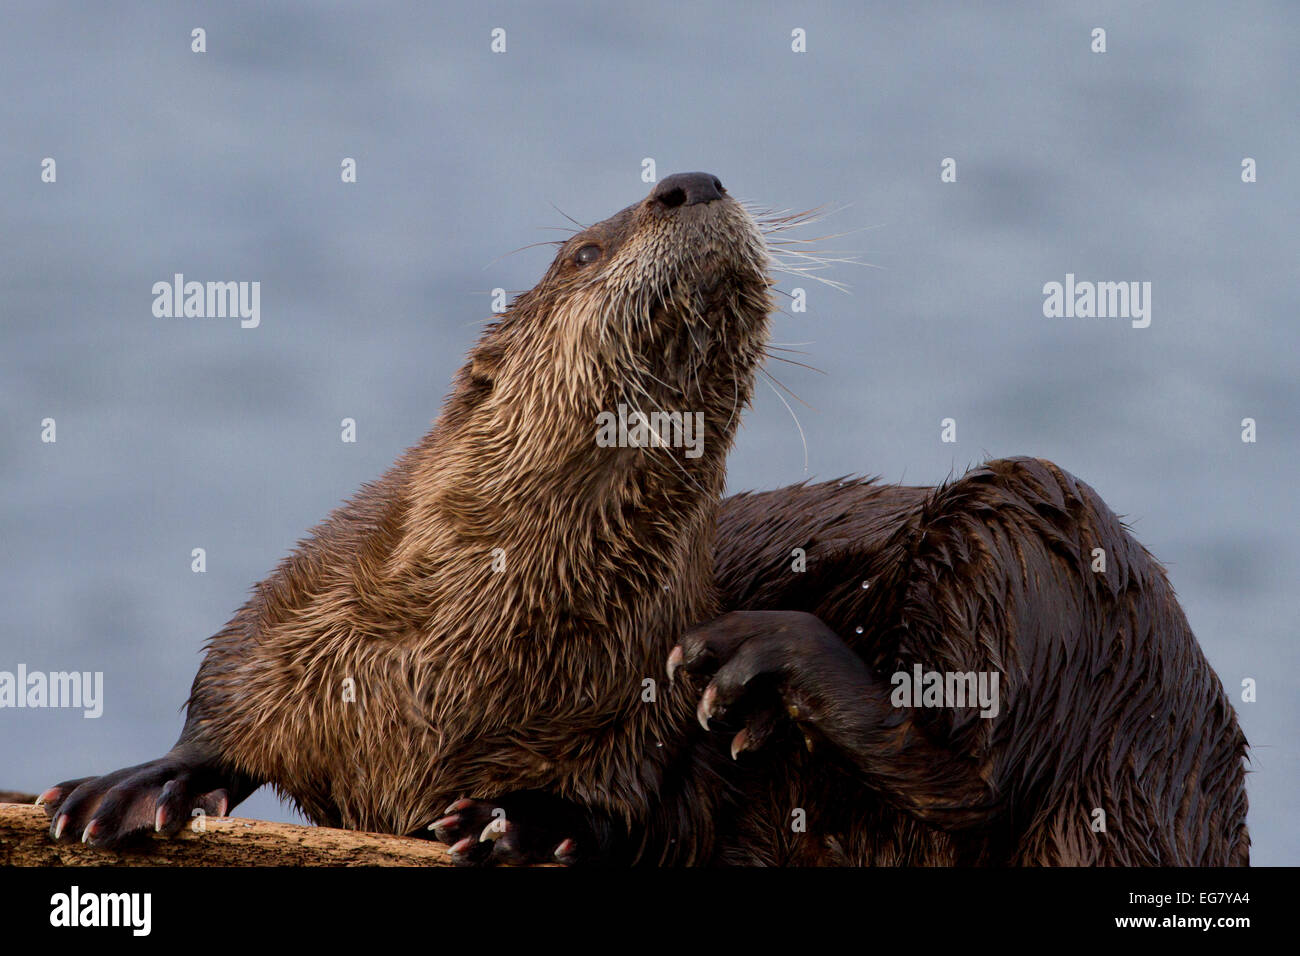 Northern River Otter (Lontra canadensis) preening on beach after eating at Whiffen Spit, Sooke, BC, Canada in January Stock Photo